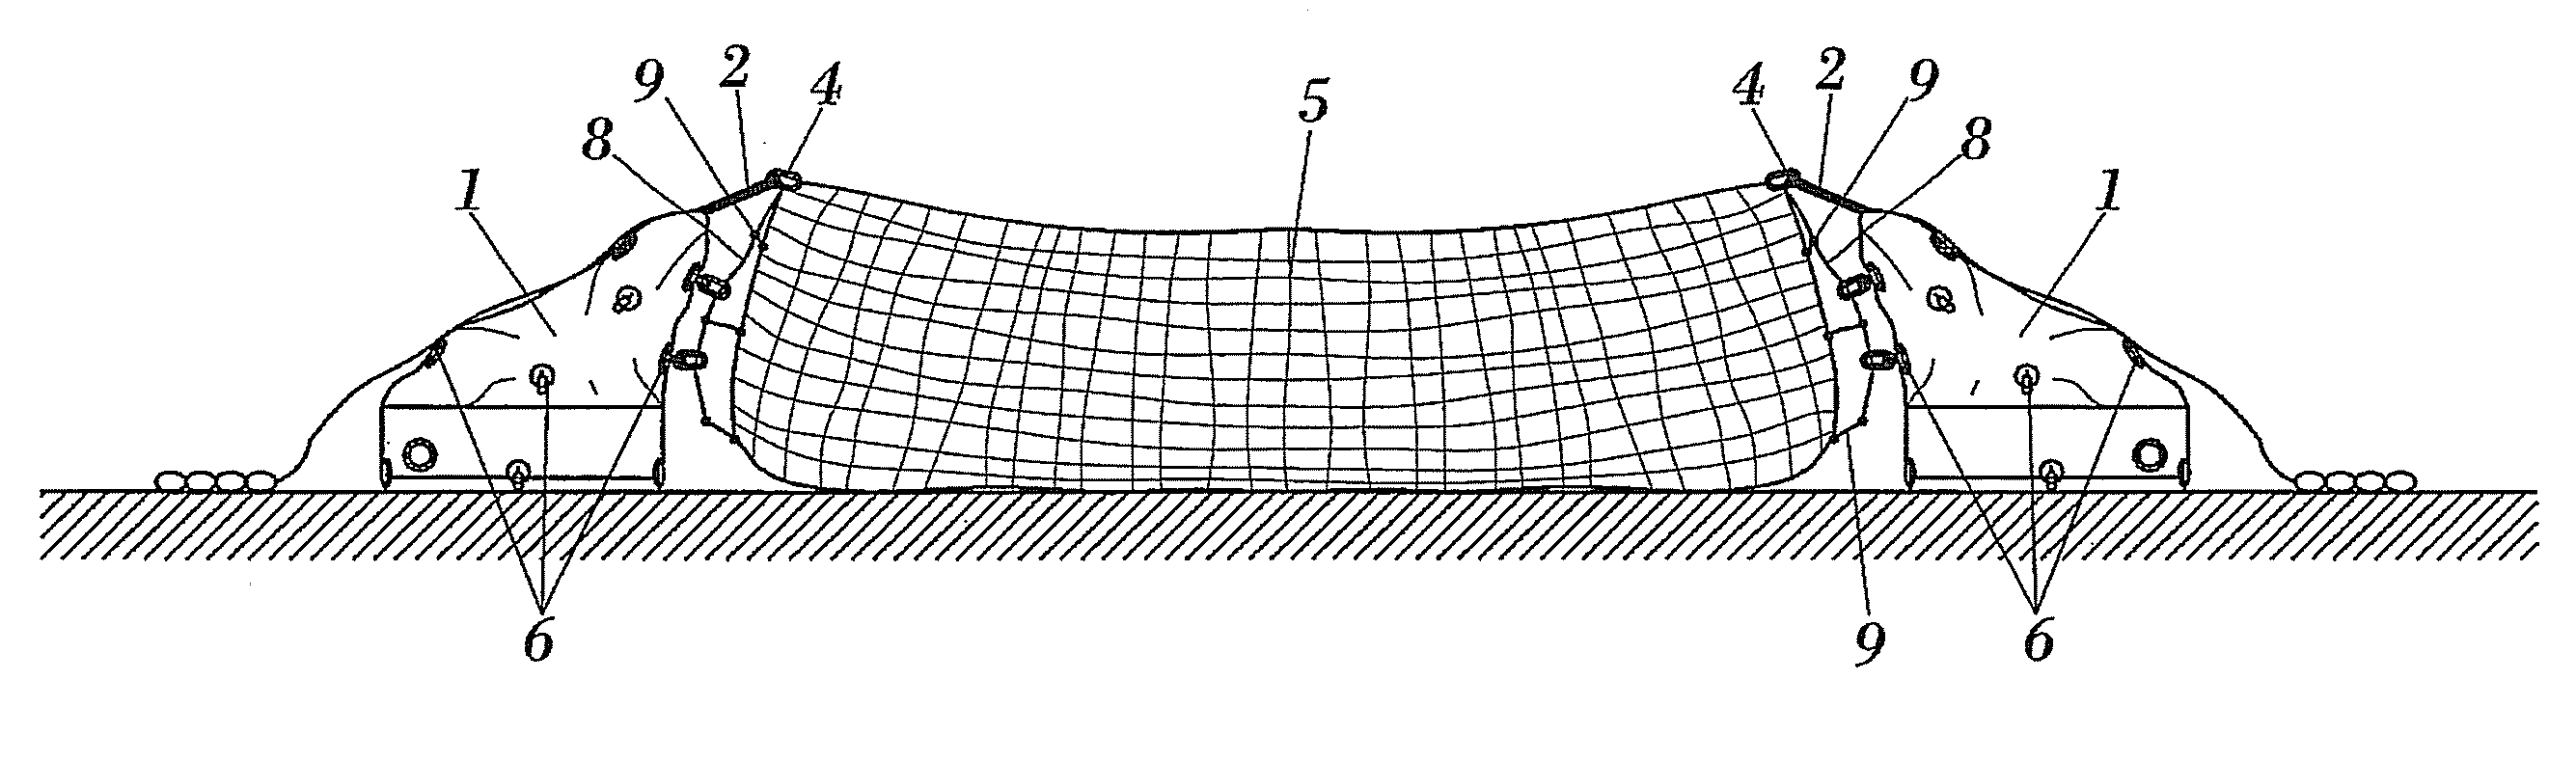 Device and method for recovering unmanned airborne vehicles